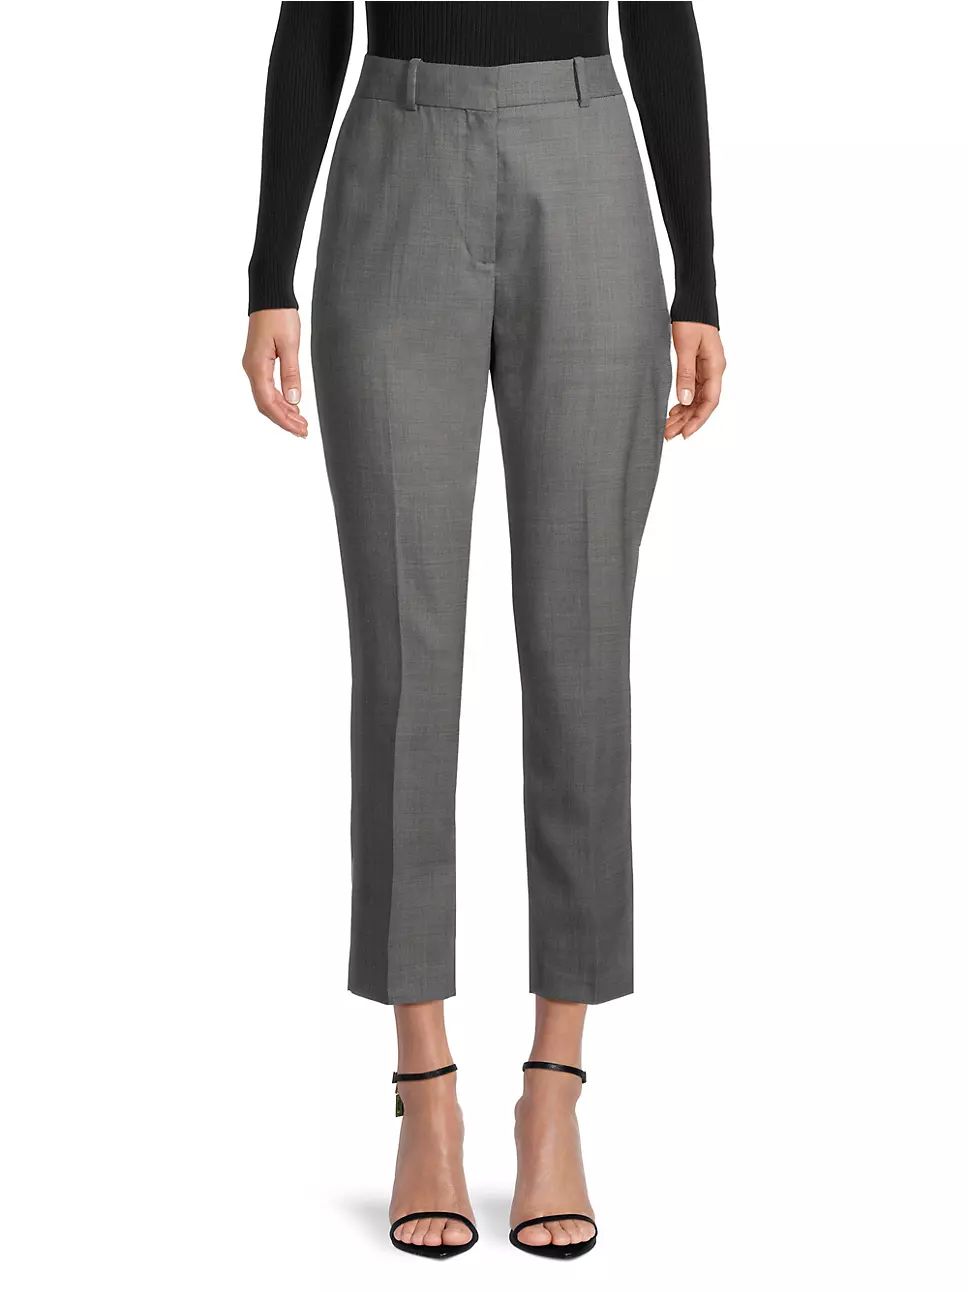 Reiss Layton Wool-Blend High-Waisted Ankle Pants | Saks Fifth Avenue